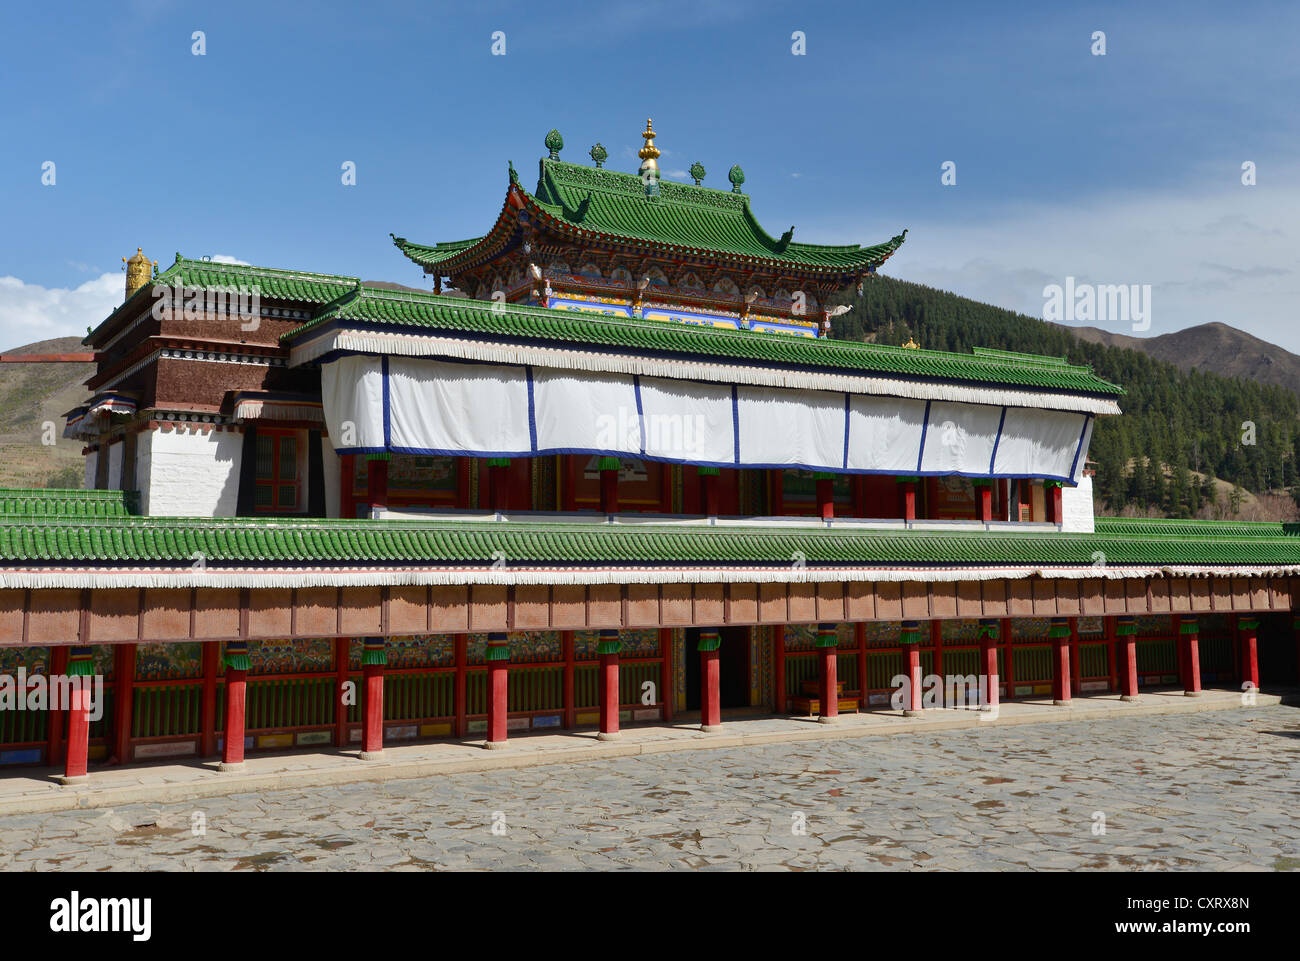 Tibetan Buddhism, monastery buildings built in the traditional Tibetan style, with green Chinese roof shingles and components Stock Photo